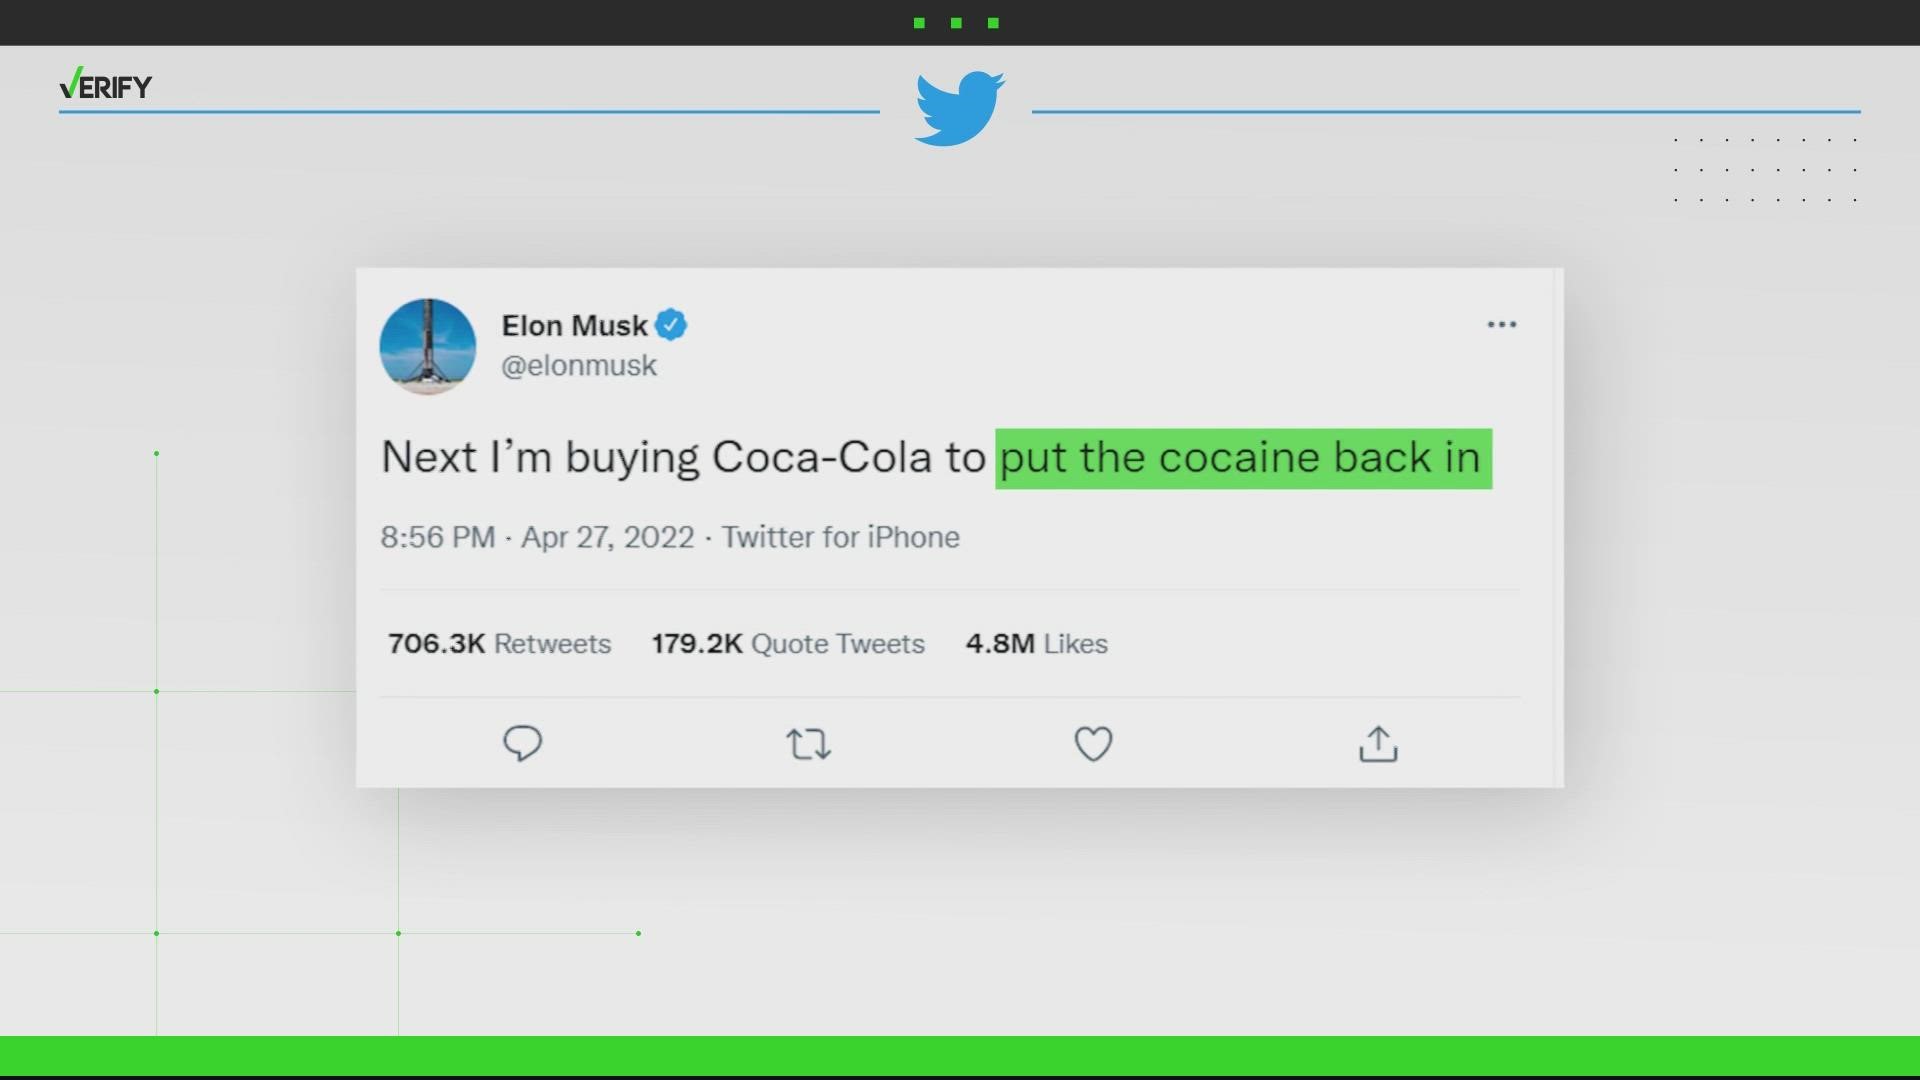 Coca-Cola is one of the top selling soda sold in the country. Elon Musk tweeted he will buy Coca-Cola next and put the cocaine back it.